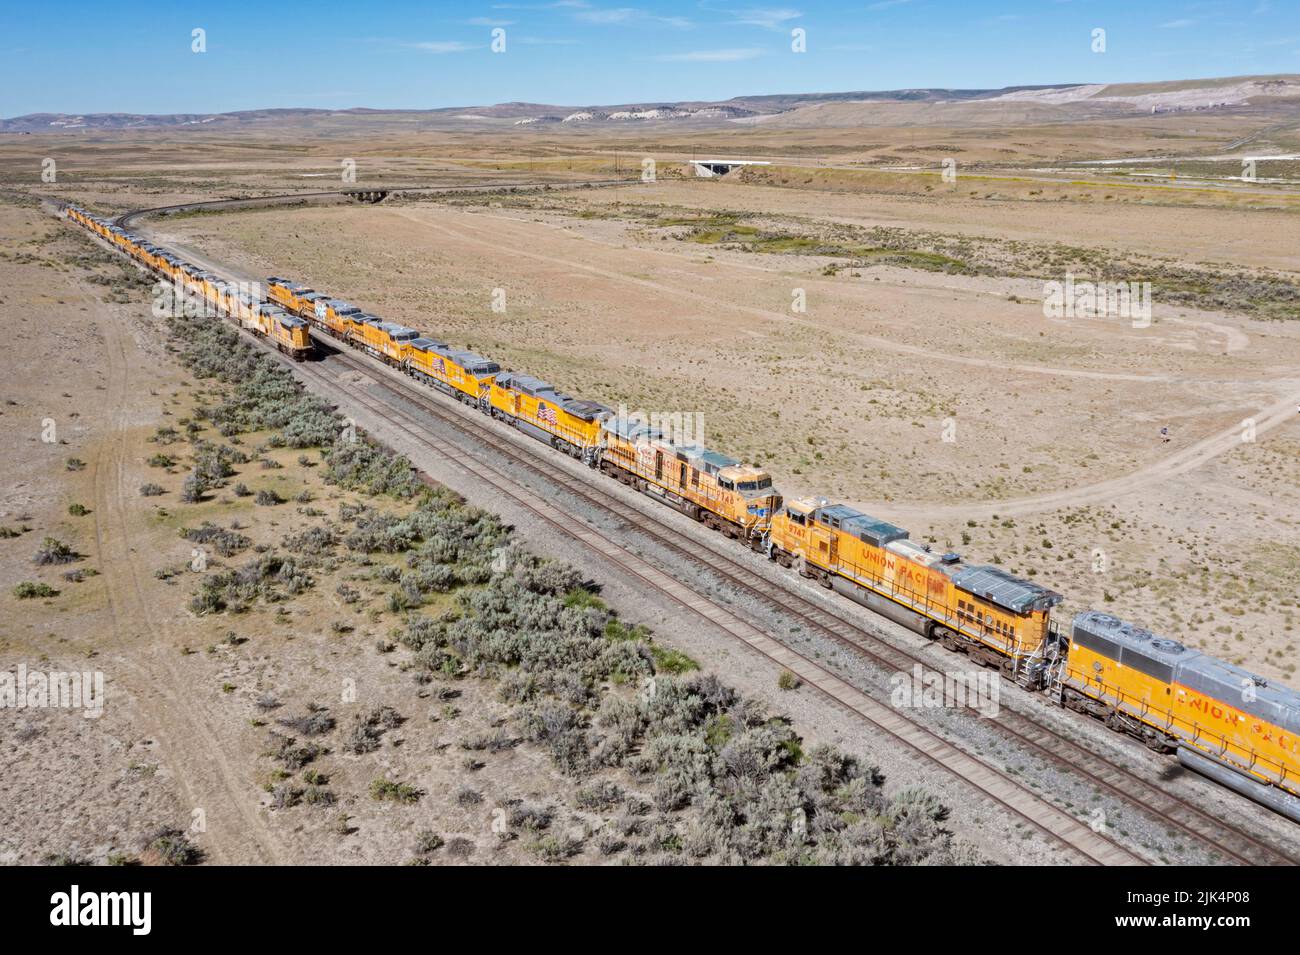 Kemmerer, Wyoming - Dozens of Union Pacific locomotives are parked in the Wyoming desert. Stock Photo